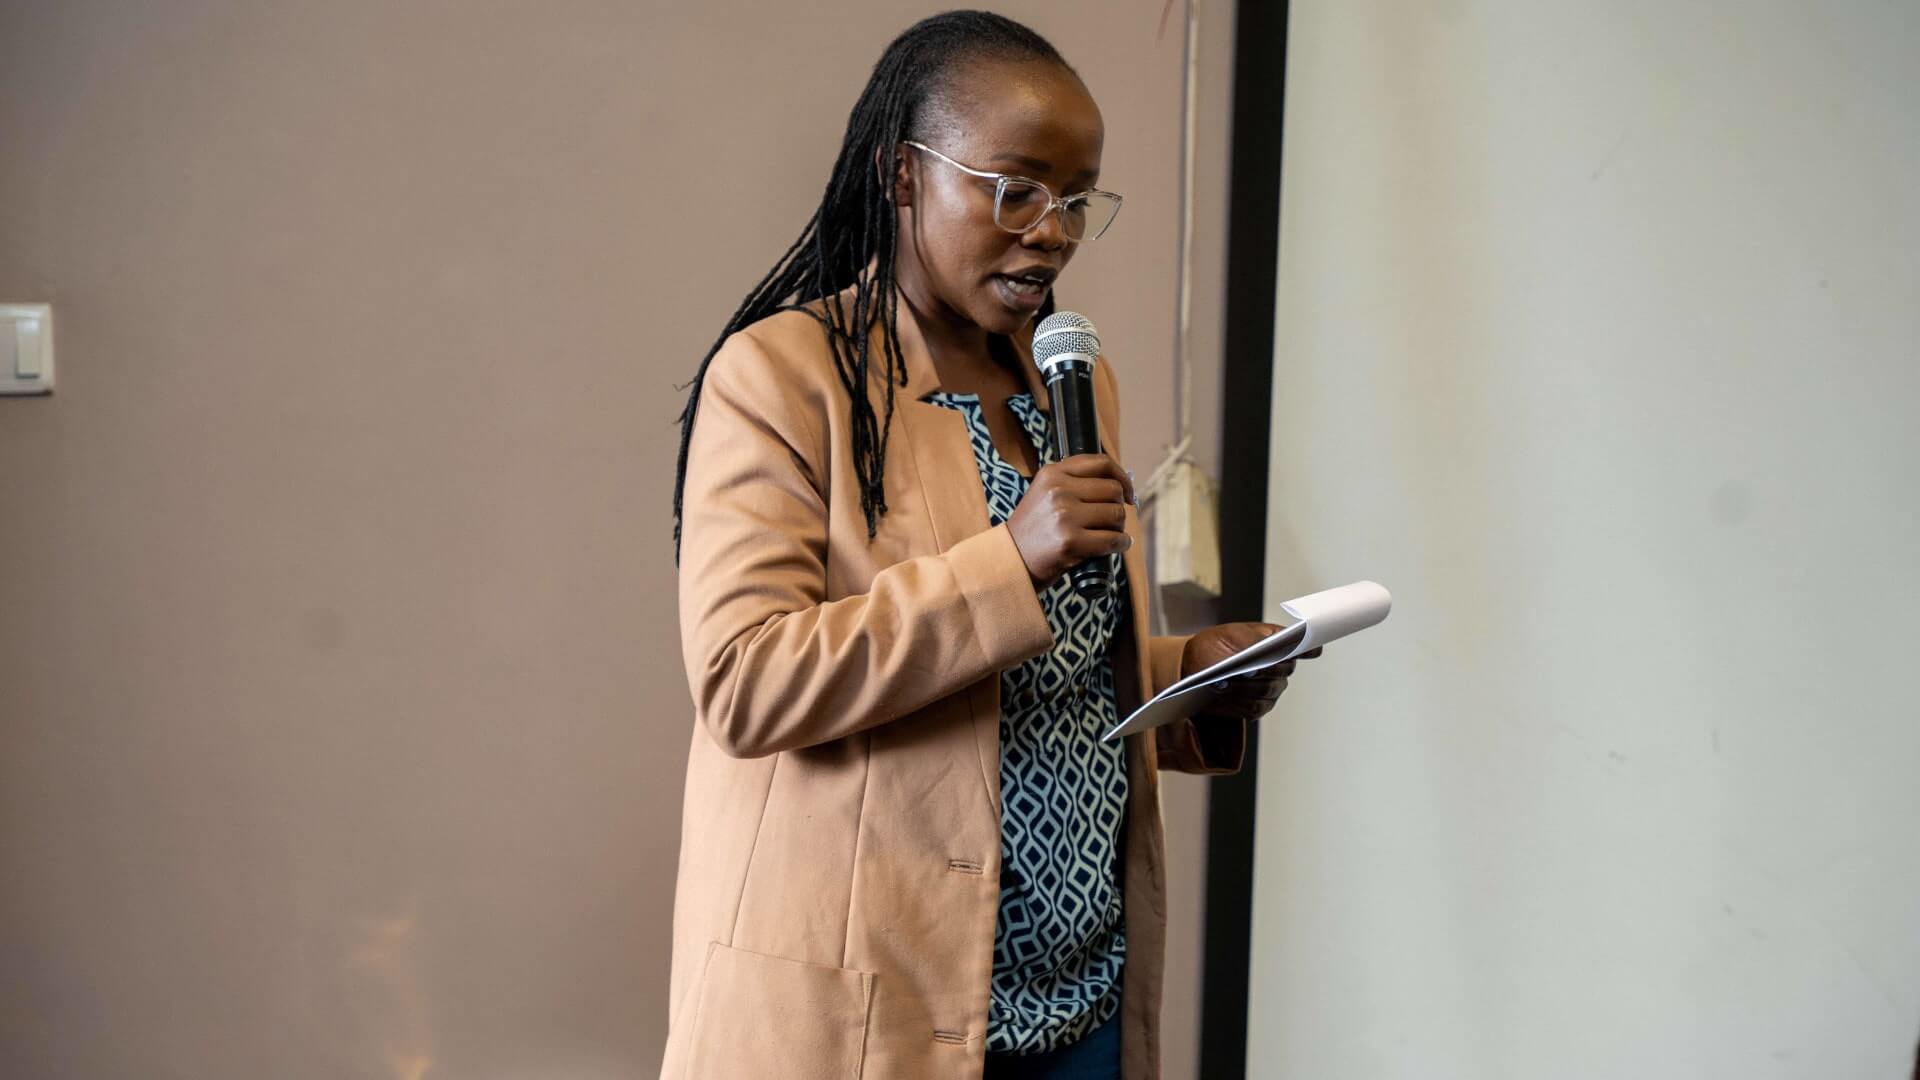 Joyce Mugure – Department of Social Protection gives an update on the CDMIS platform that is designed to digitize Group Registration among other services.